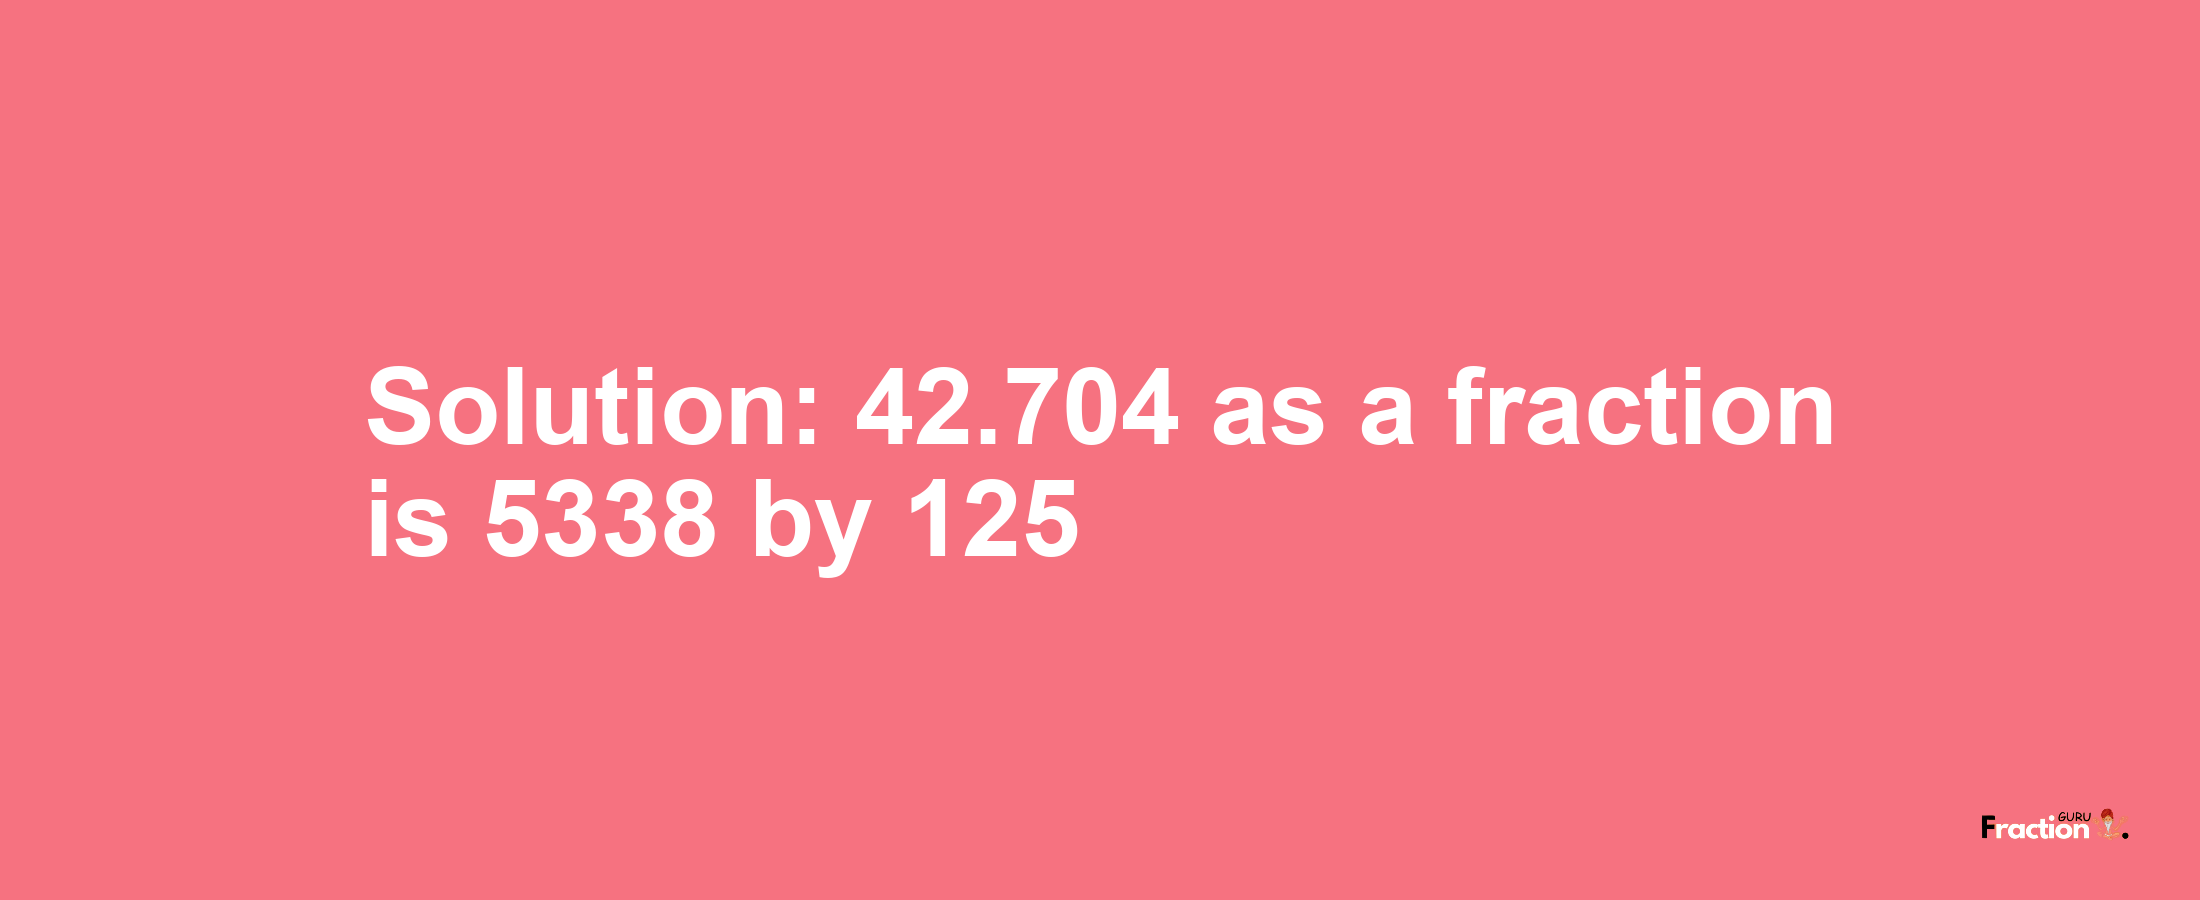 Solution:42.704 as a fraction is 5338/125